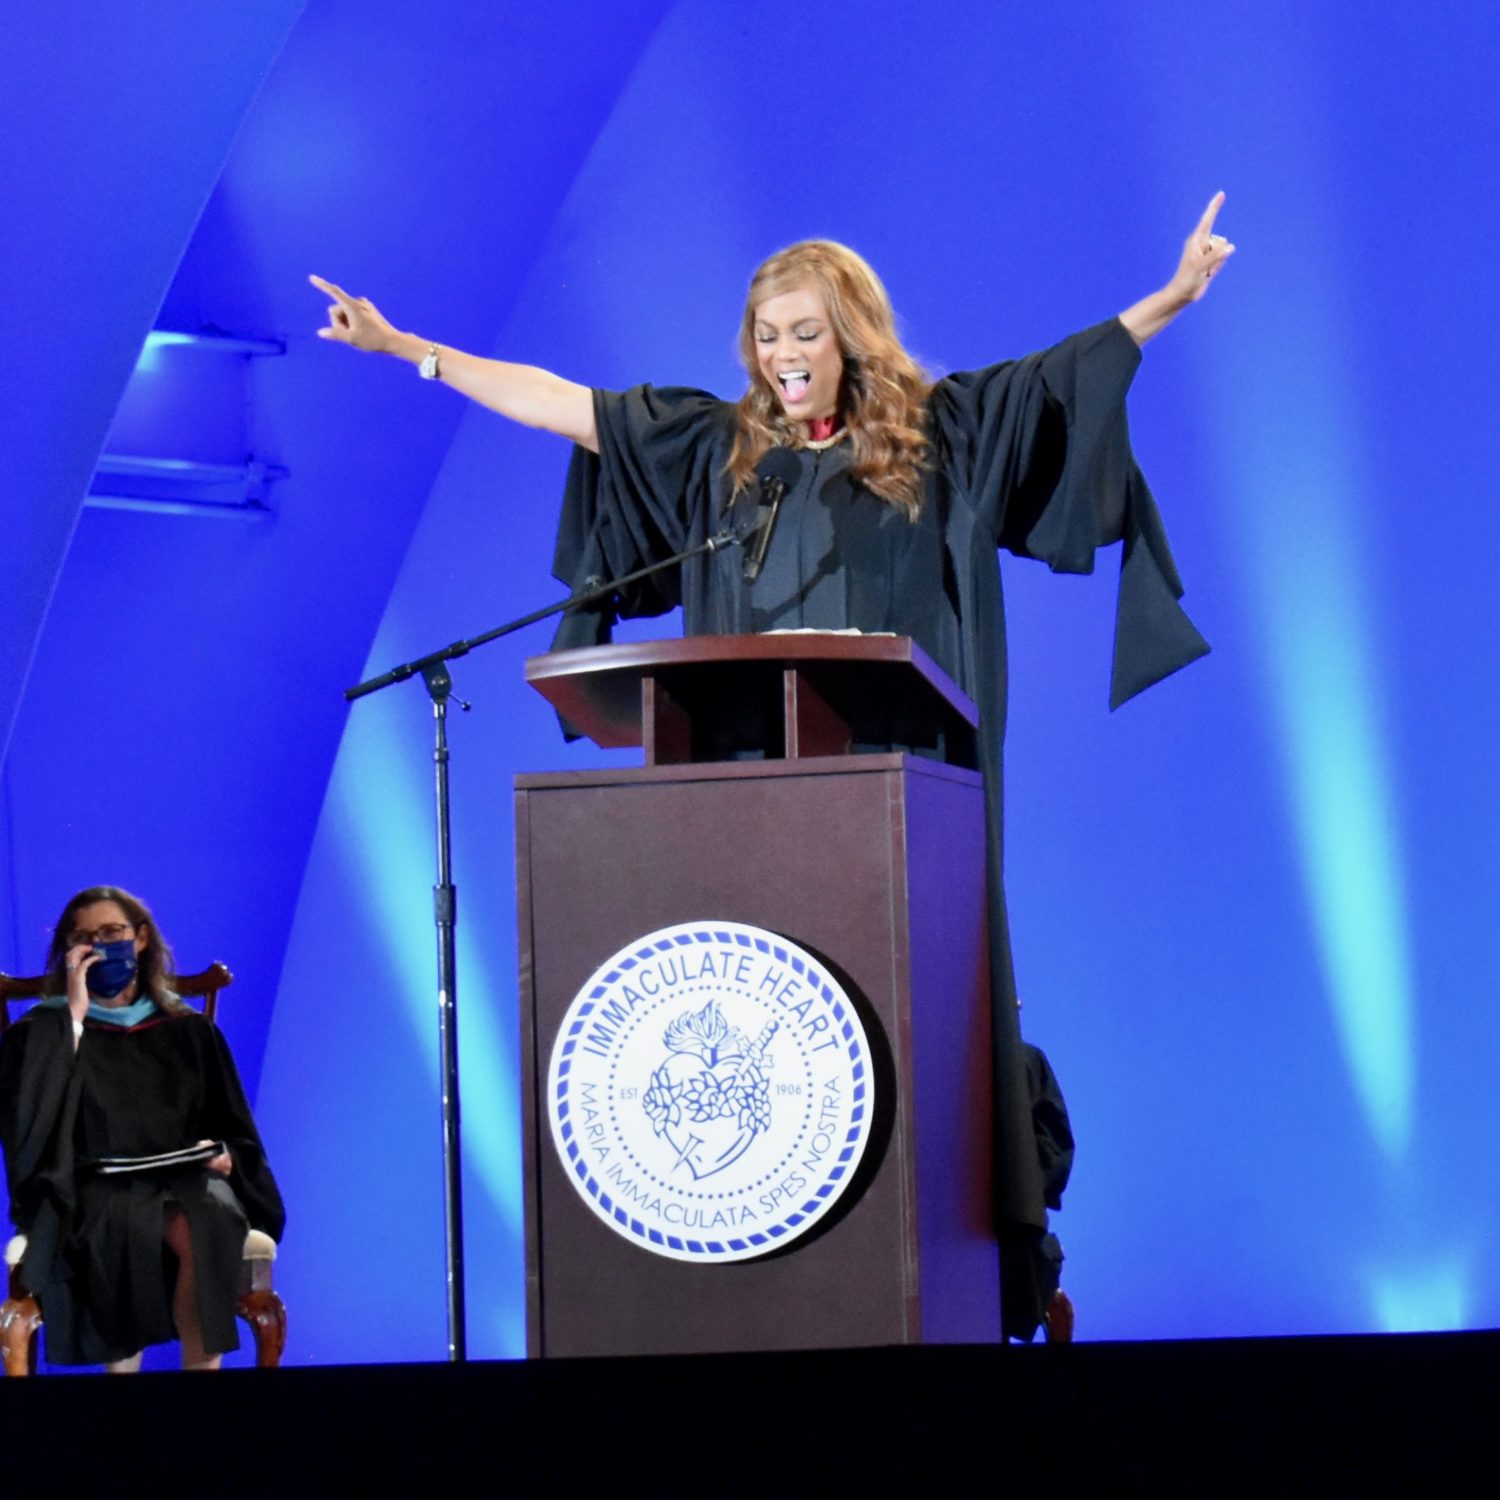 Tyra Banks speaking at the 2021 graduation ceremonies for Immaculate Heart at the Hollywood Bowl